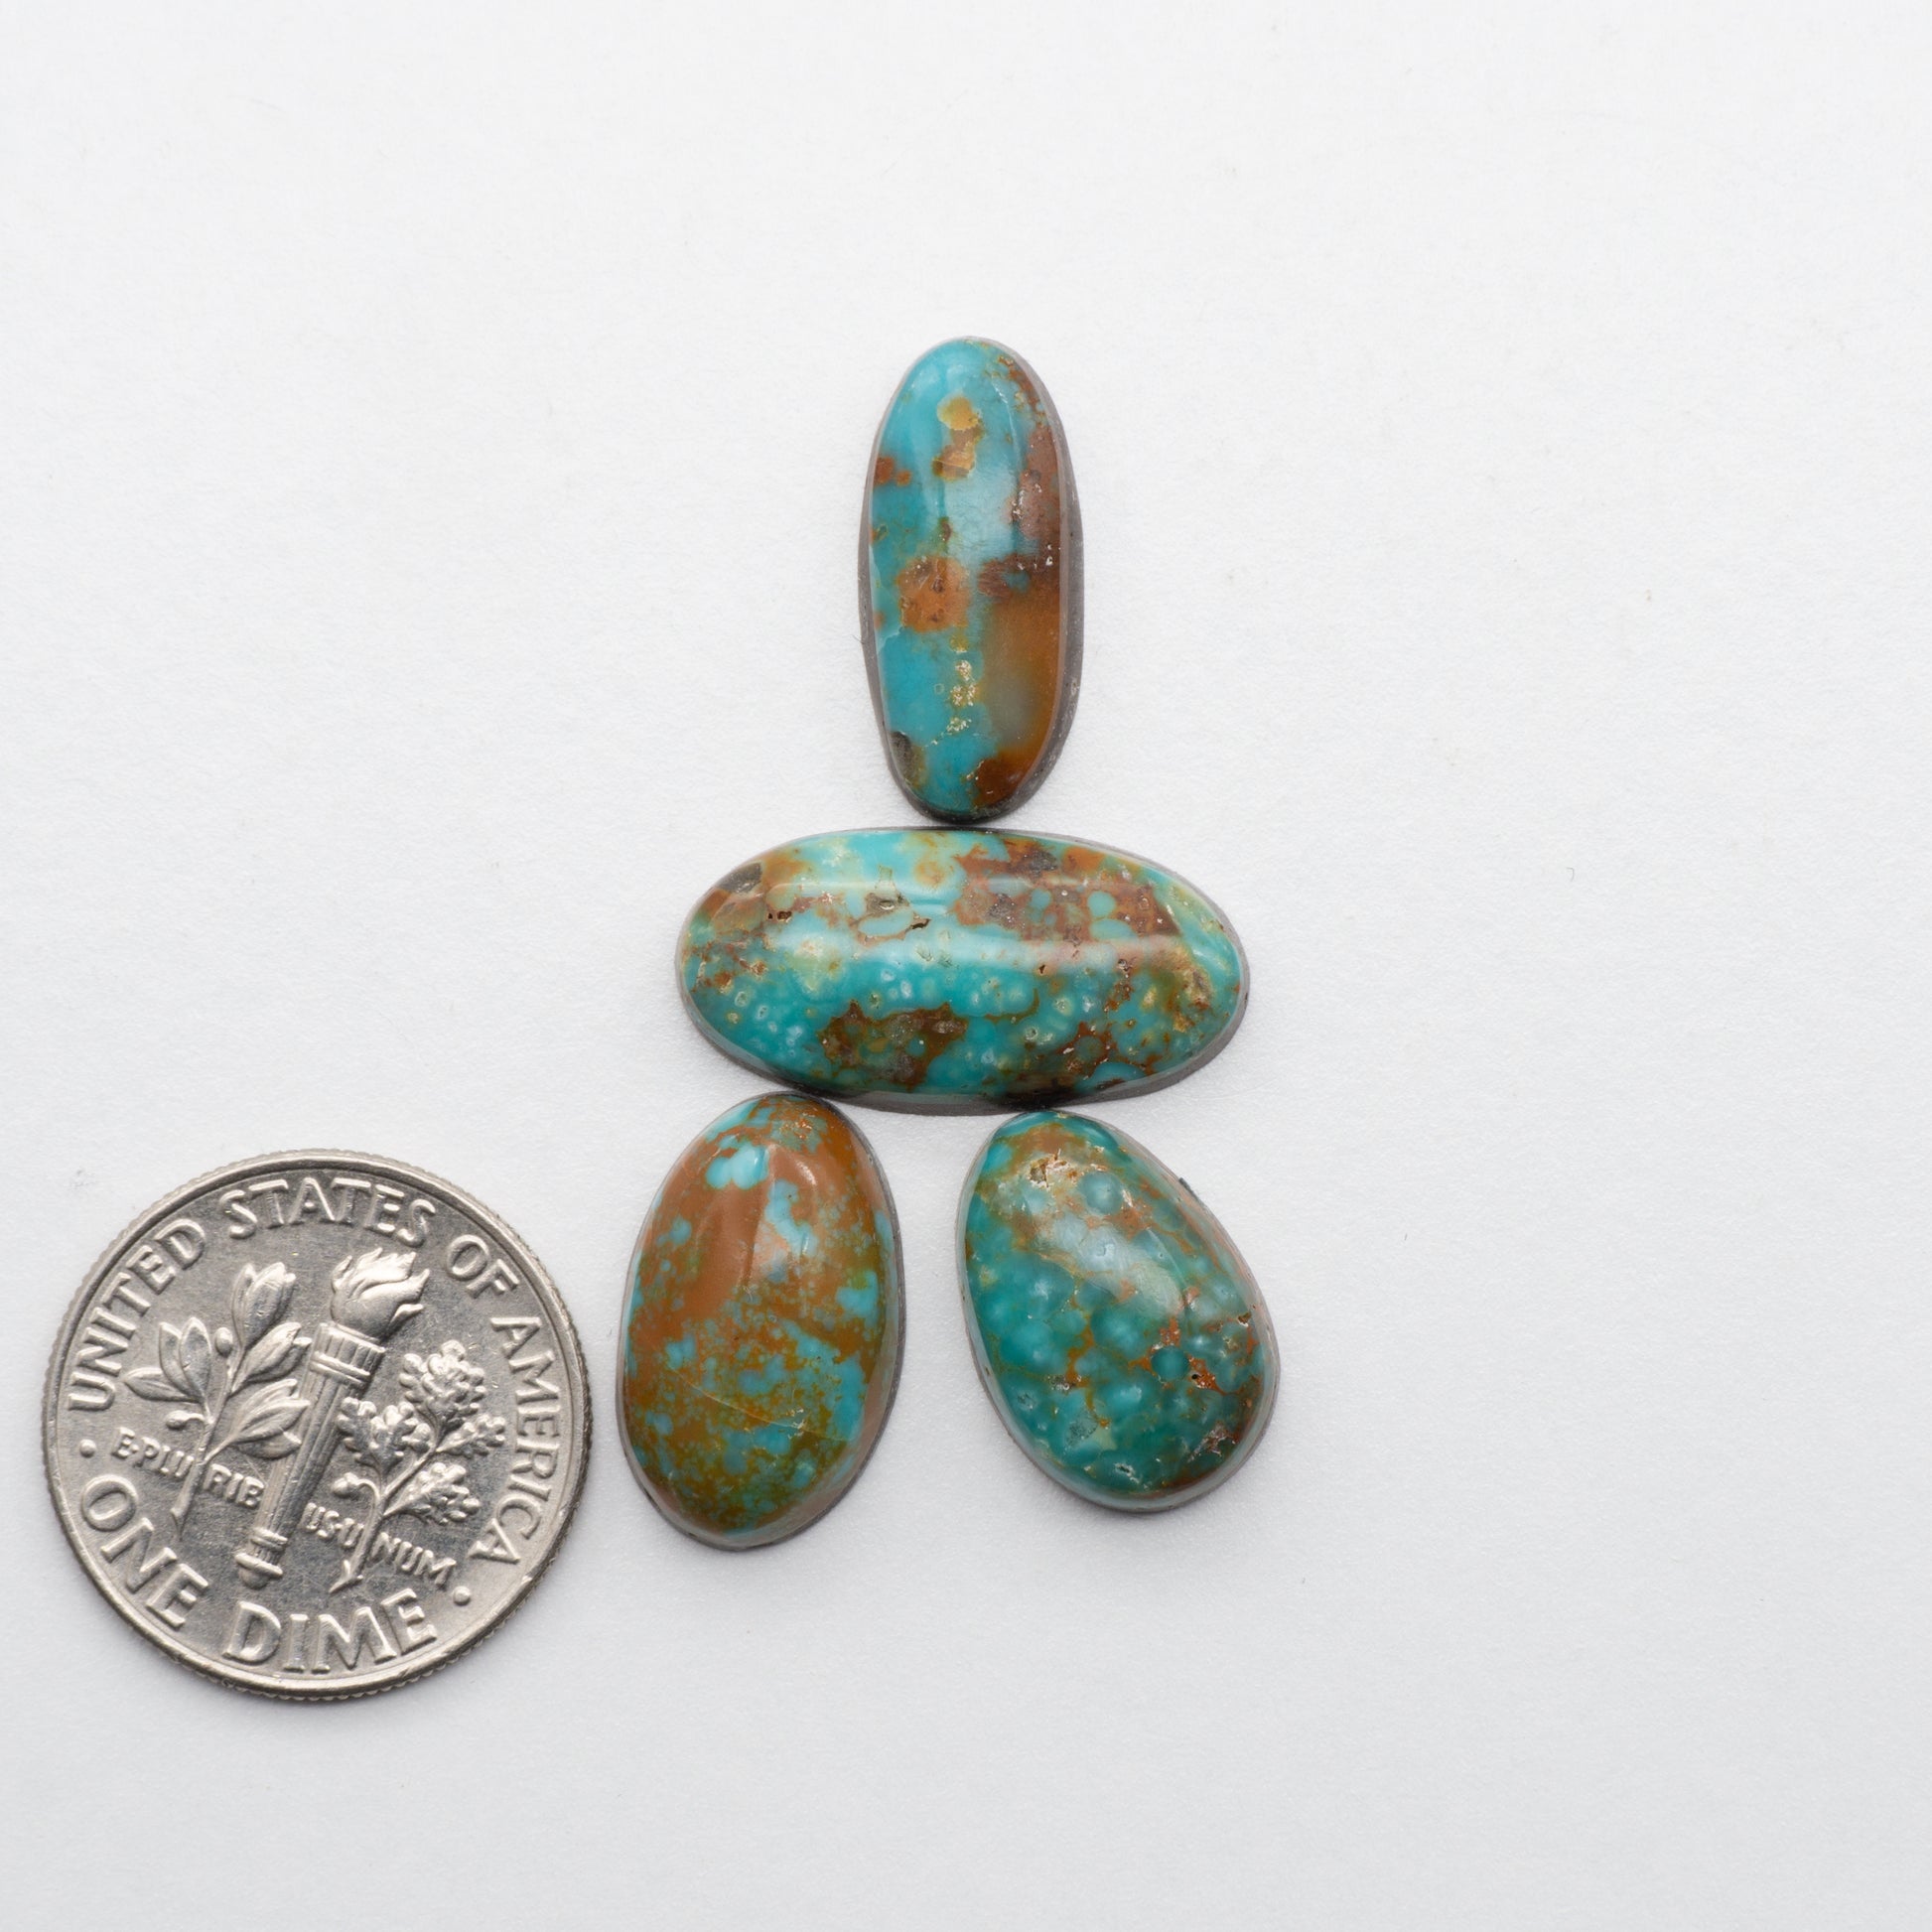 These Cumpas Turquoise cabochons have a glossy finish and are backed for added strength. Mined in Sonora, MX. Similar to Kingman Turquoise used for jewerly making.